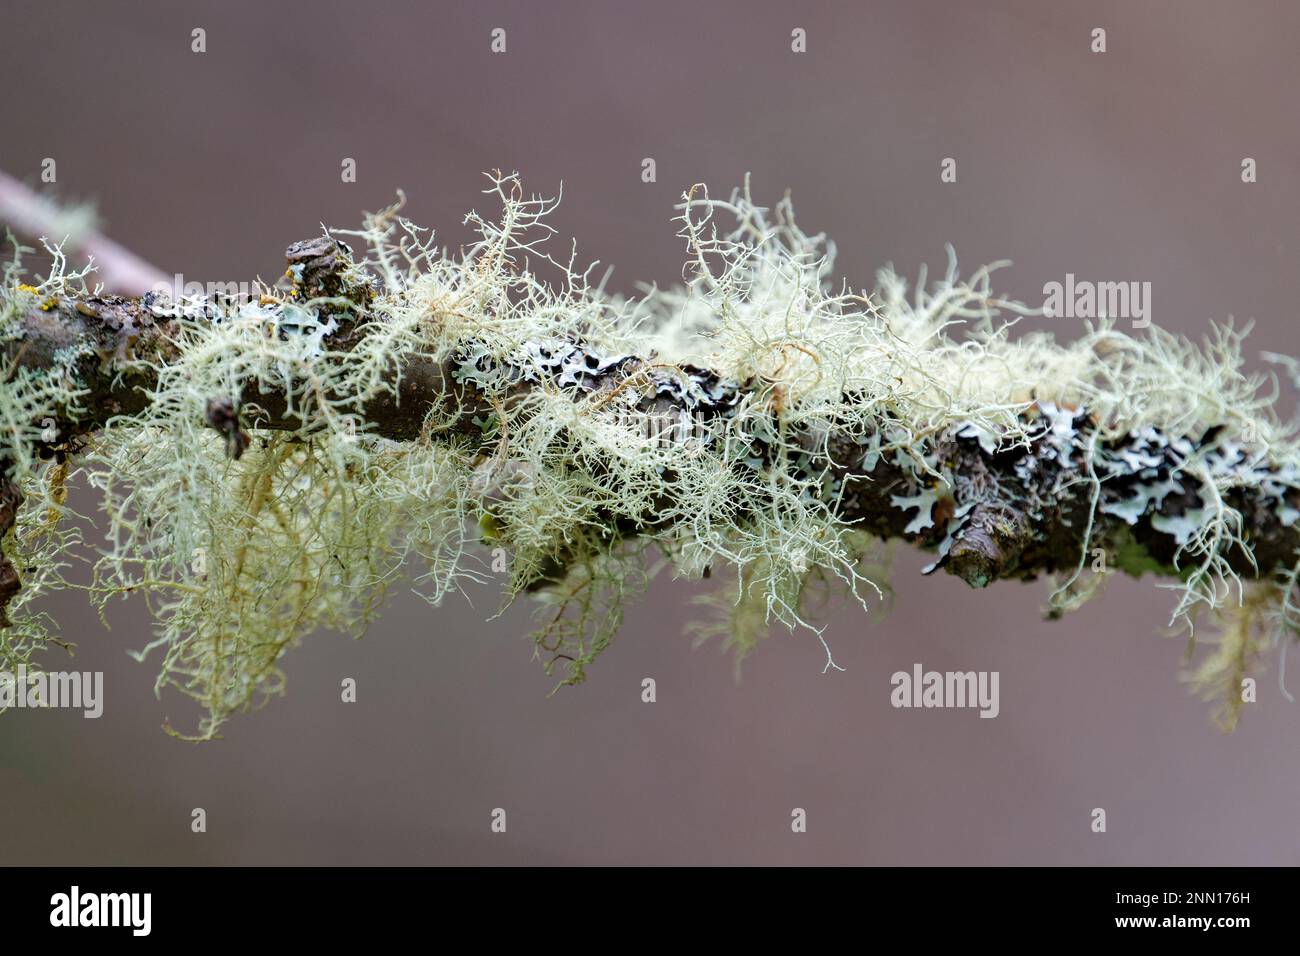 A closeup of usnea barbata and moss growing on a tree branch Stock Photo